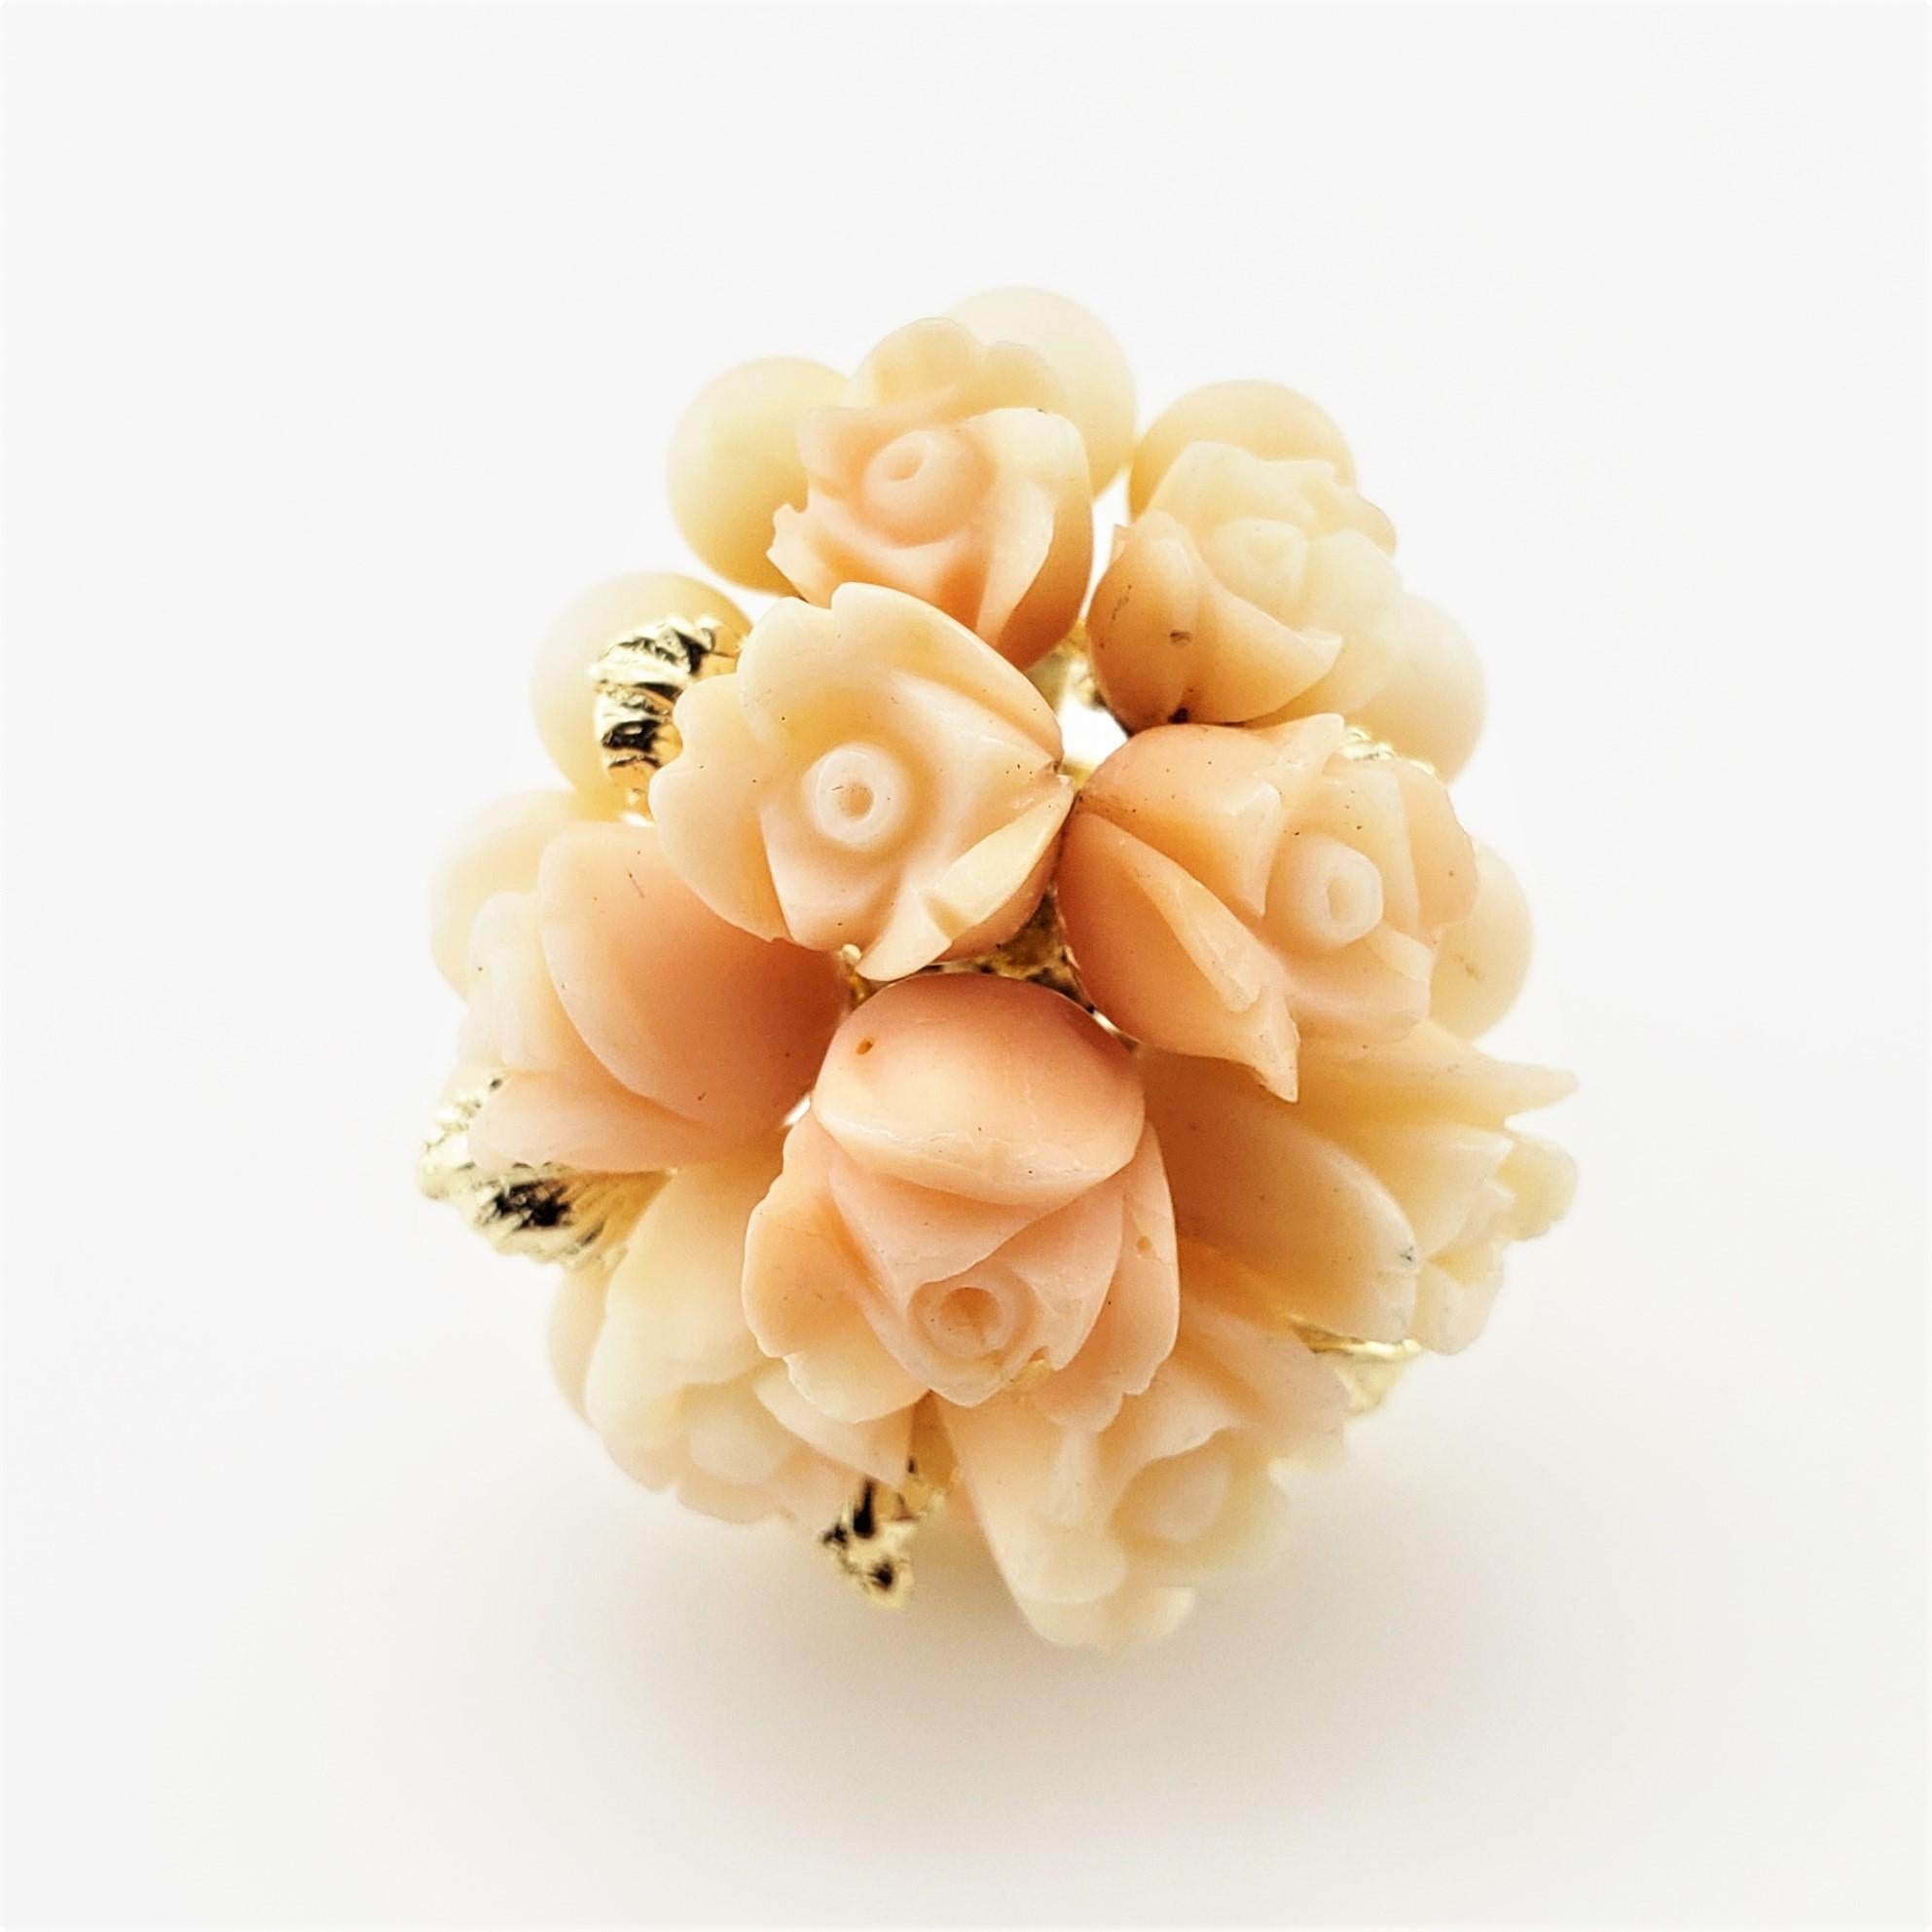 14 Karat Yellow Gold and Coral Floral Ring Size 6-

This spectacular ring features carved coral roses set in beautifully detailed 14K yellow gold.  Top of ring measures 32 mm x 27 mm.  Shank measures 3 mm.

Ring Size: 6 

Weight:  10.7 dwt. /  16.7